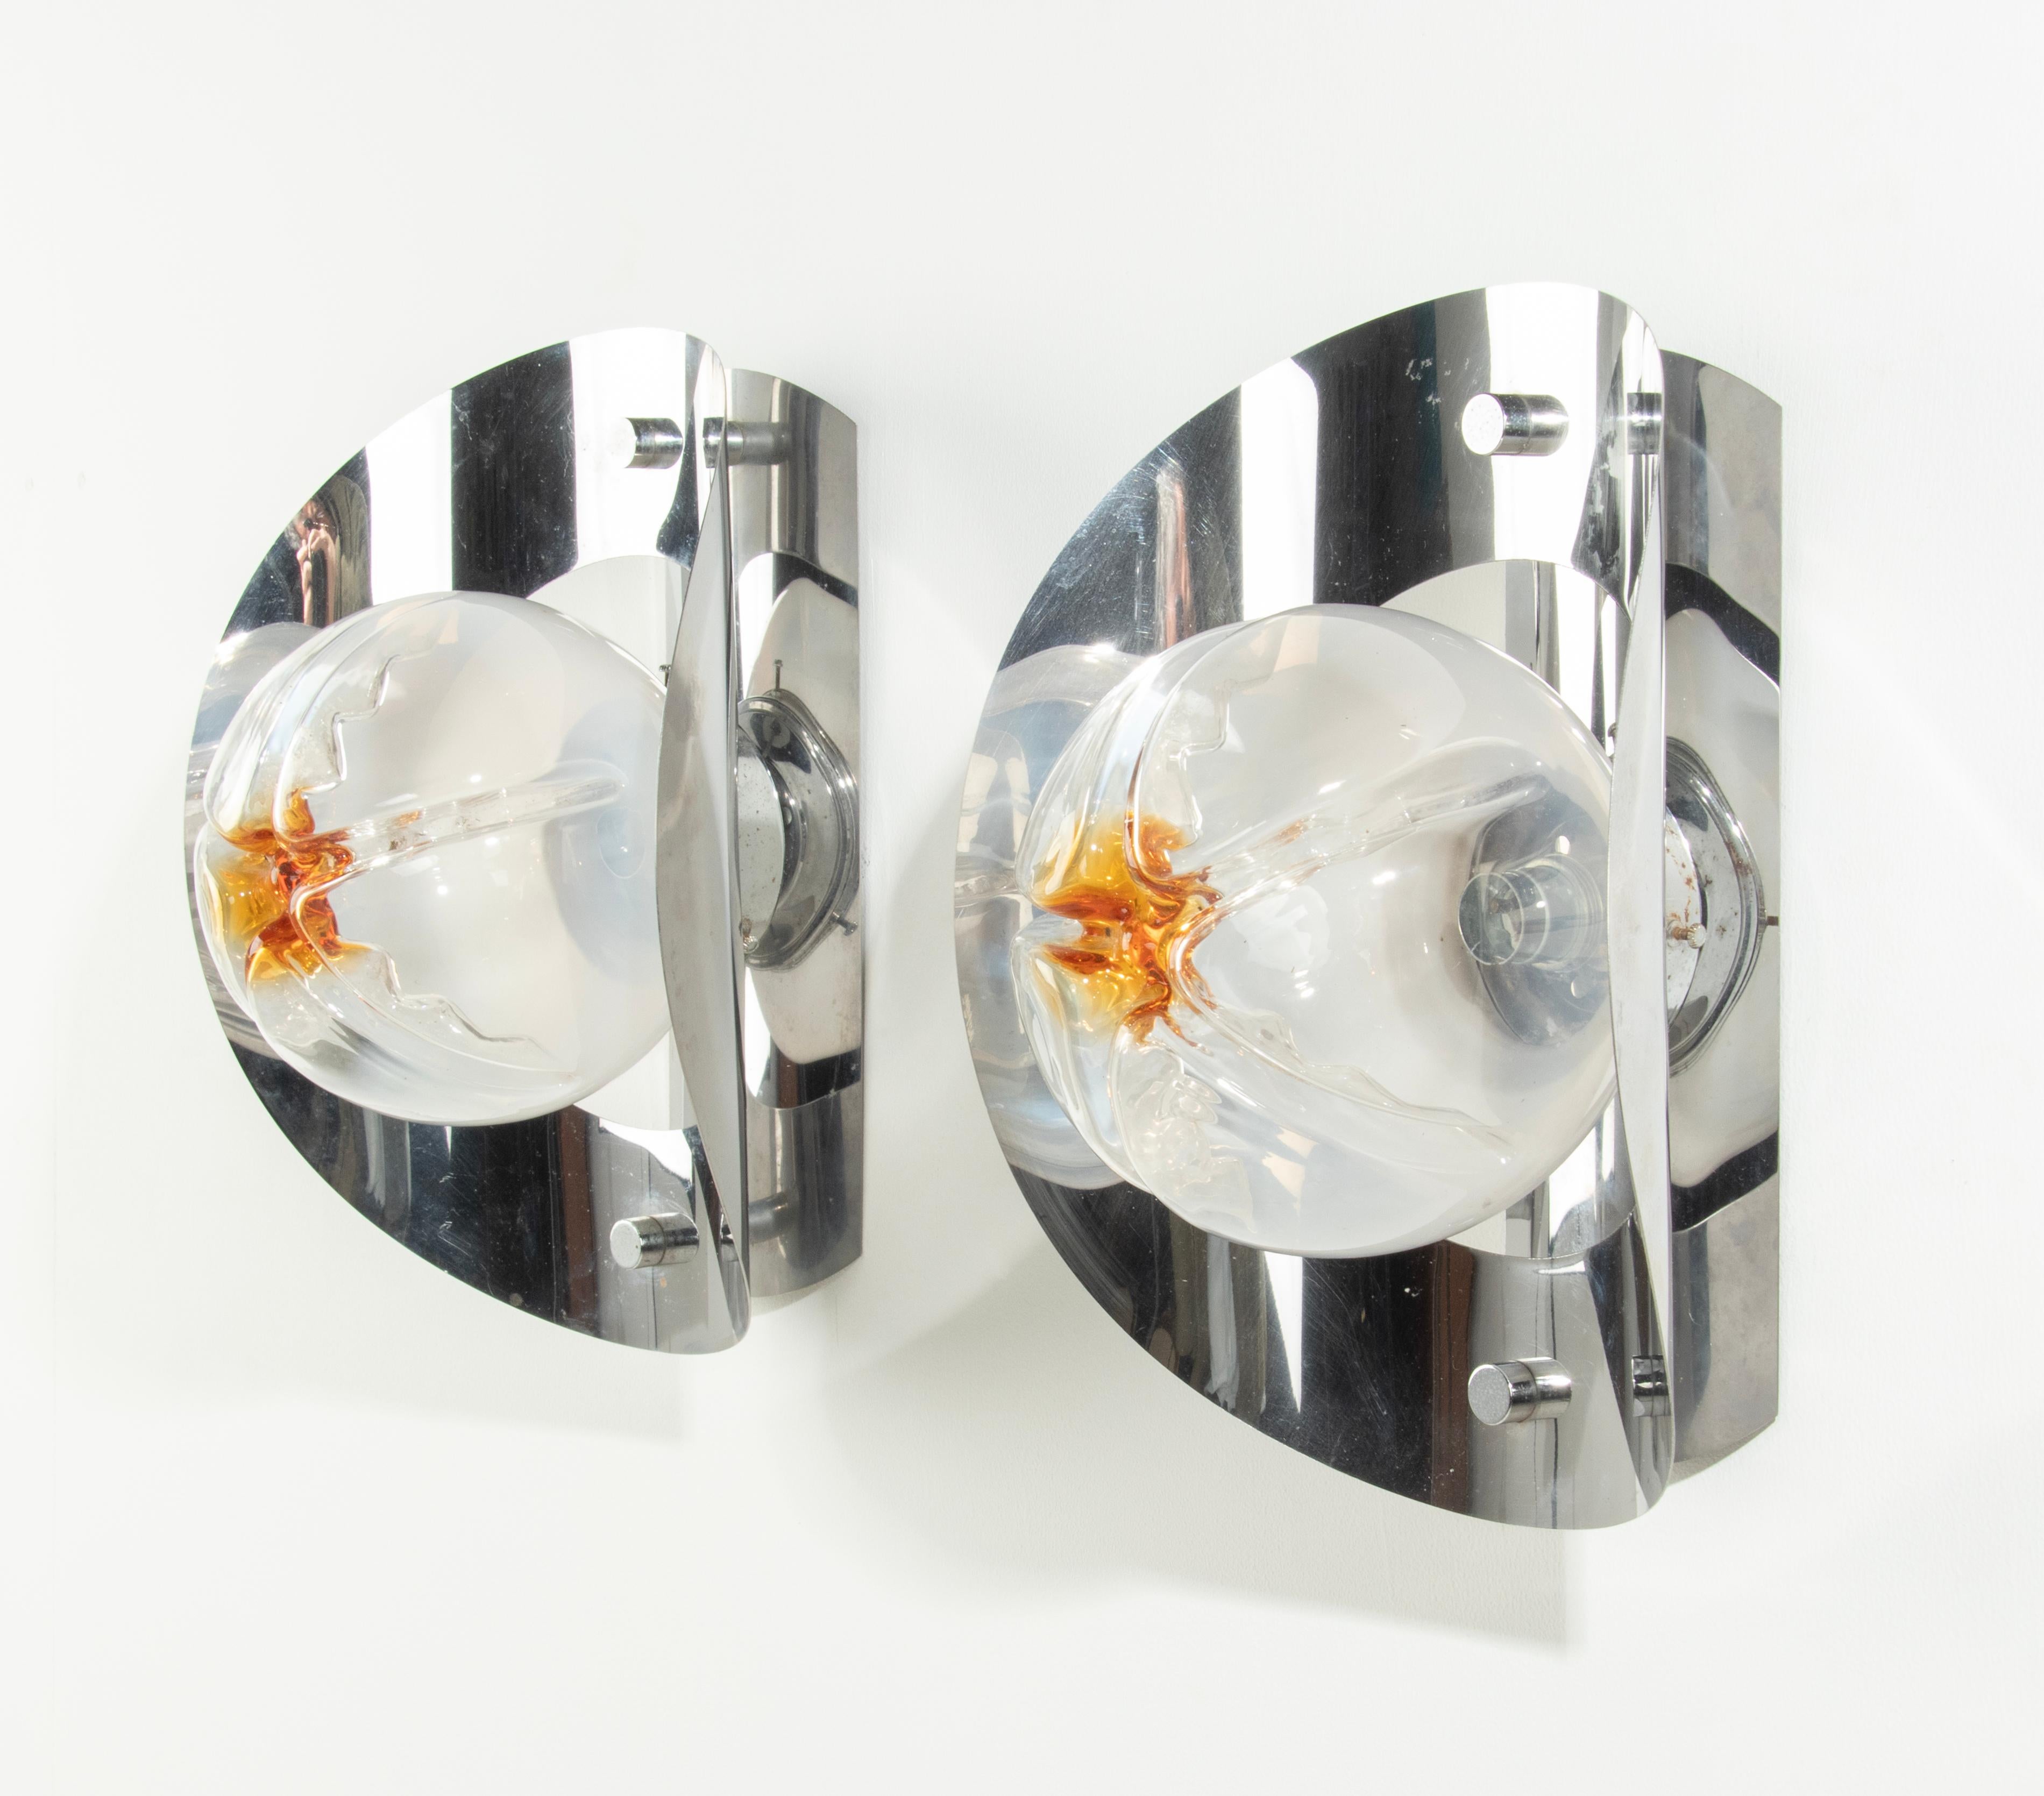 A pair of Italian Mazzega wall sconces/lights. Made of chrome plated metal, with Murano Glass globe glass shades. Bayonet lamp socket. Suitable for 220-240 Volt. The lights are in working order. The chrome plating is in good vintage